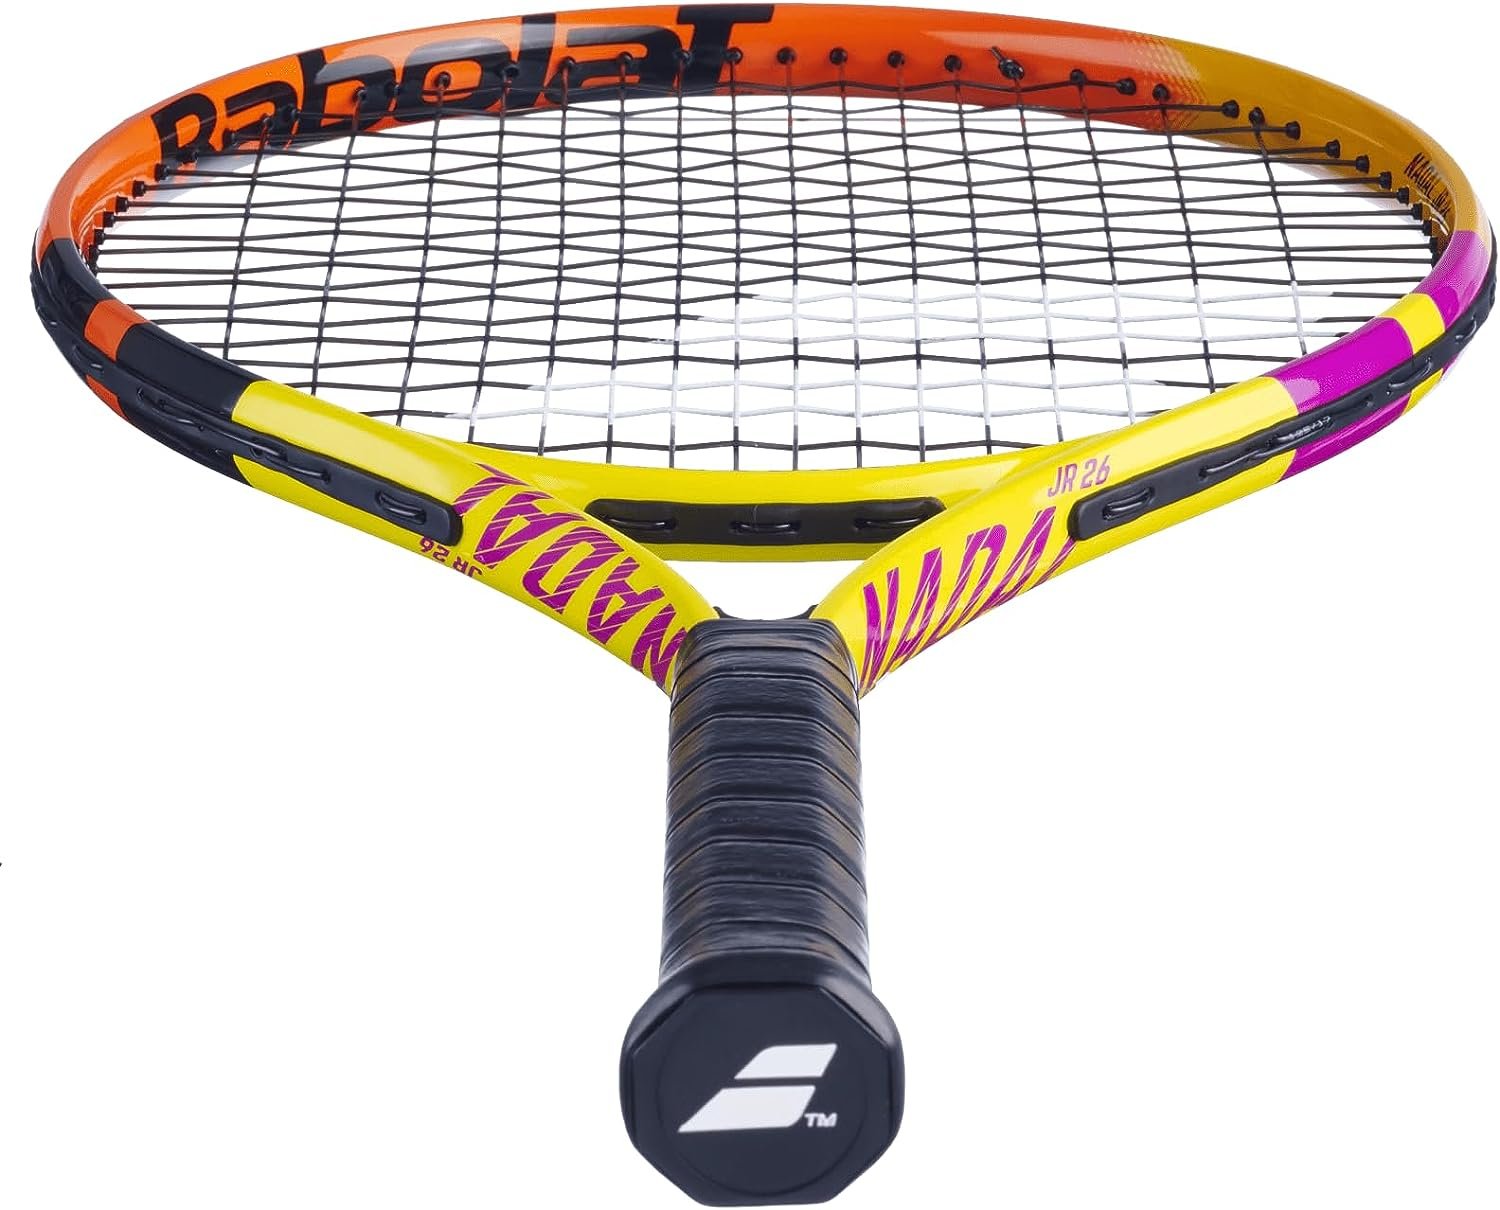 Babolat Nadal Junior Tennis Racquet (Rafa Edition) Bundled with a Child's Tennis Backpack